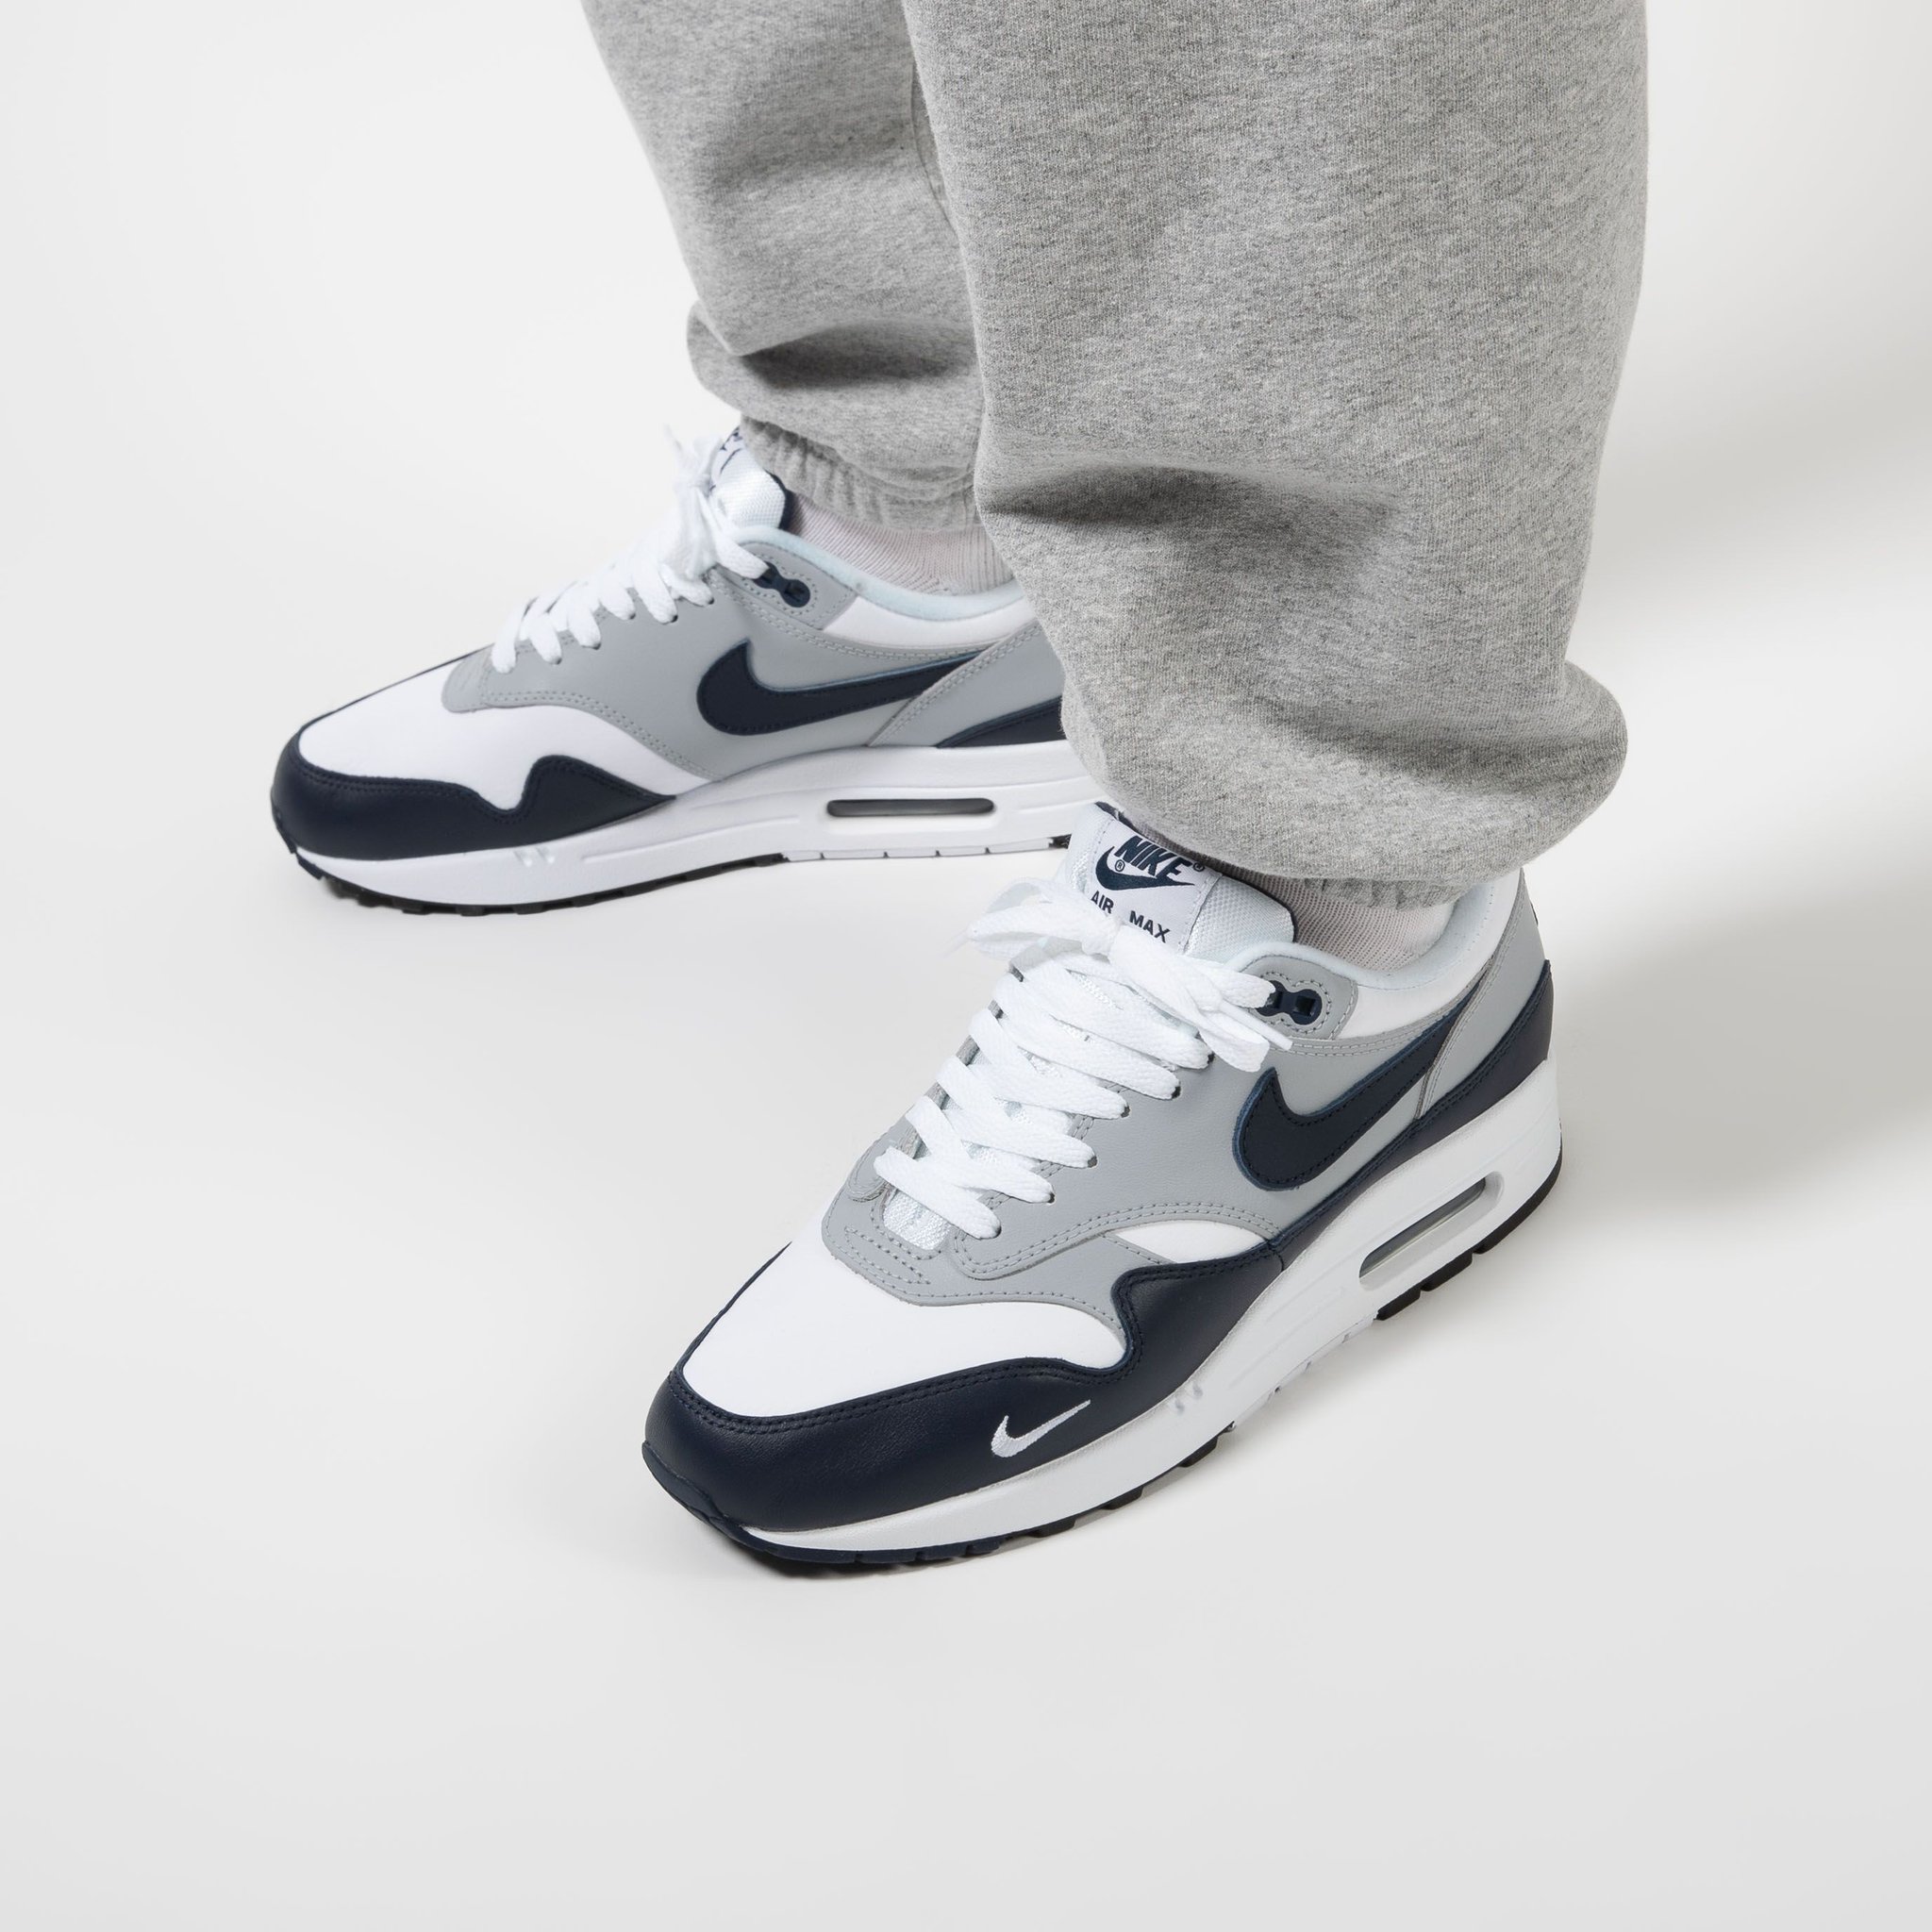 Titolo Shop - out now 🔥 Nike Air Max 1 Lv8 Obsidian ➡️